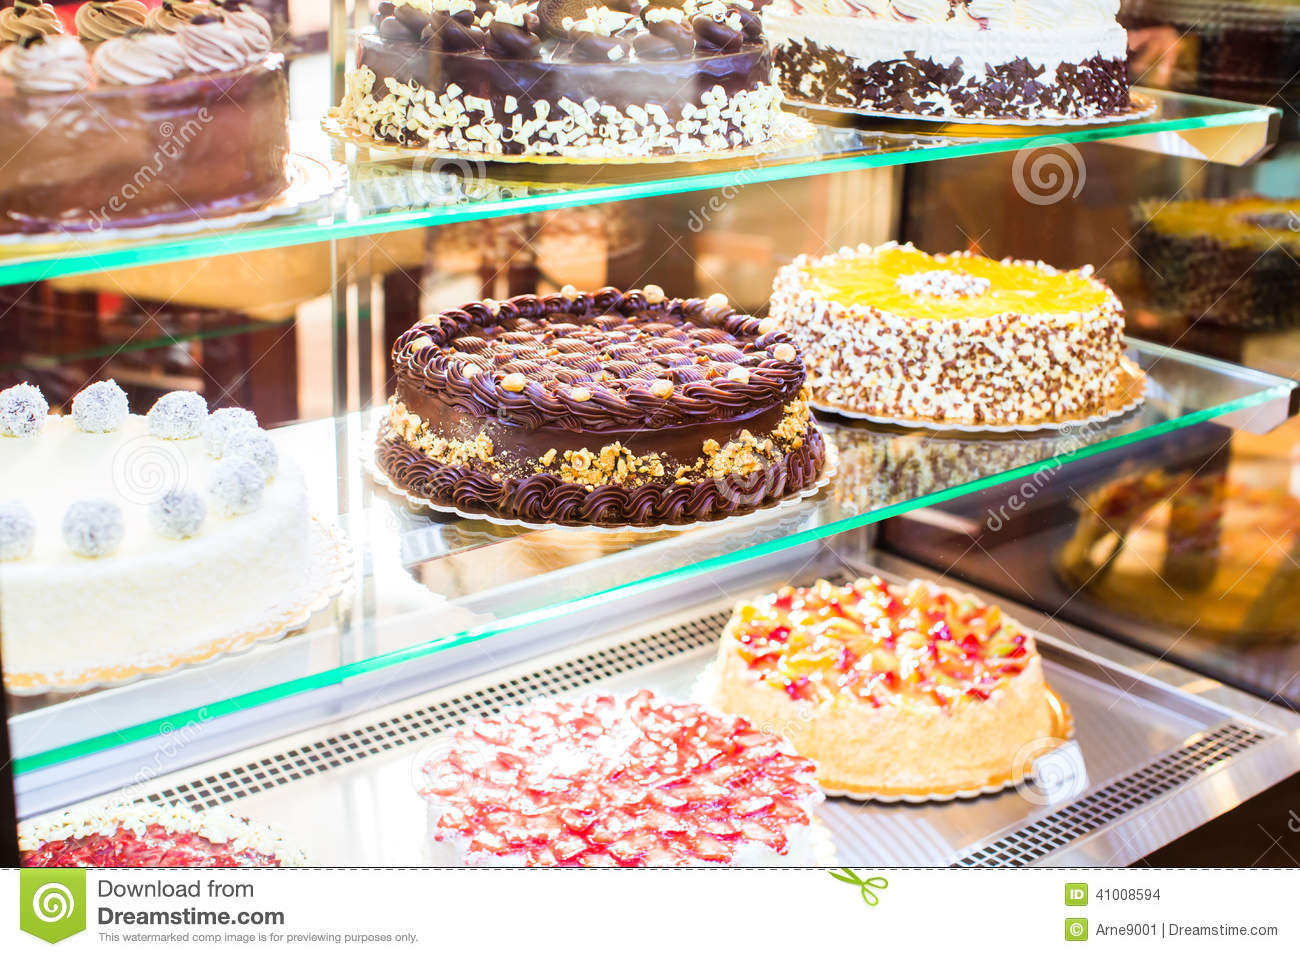 Pastry Shop In Glass Cabinet Display Stock Photo   Image  41008594